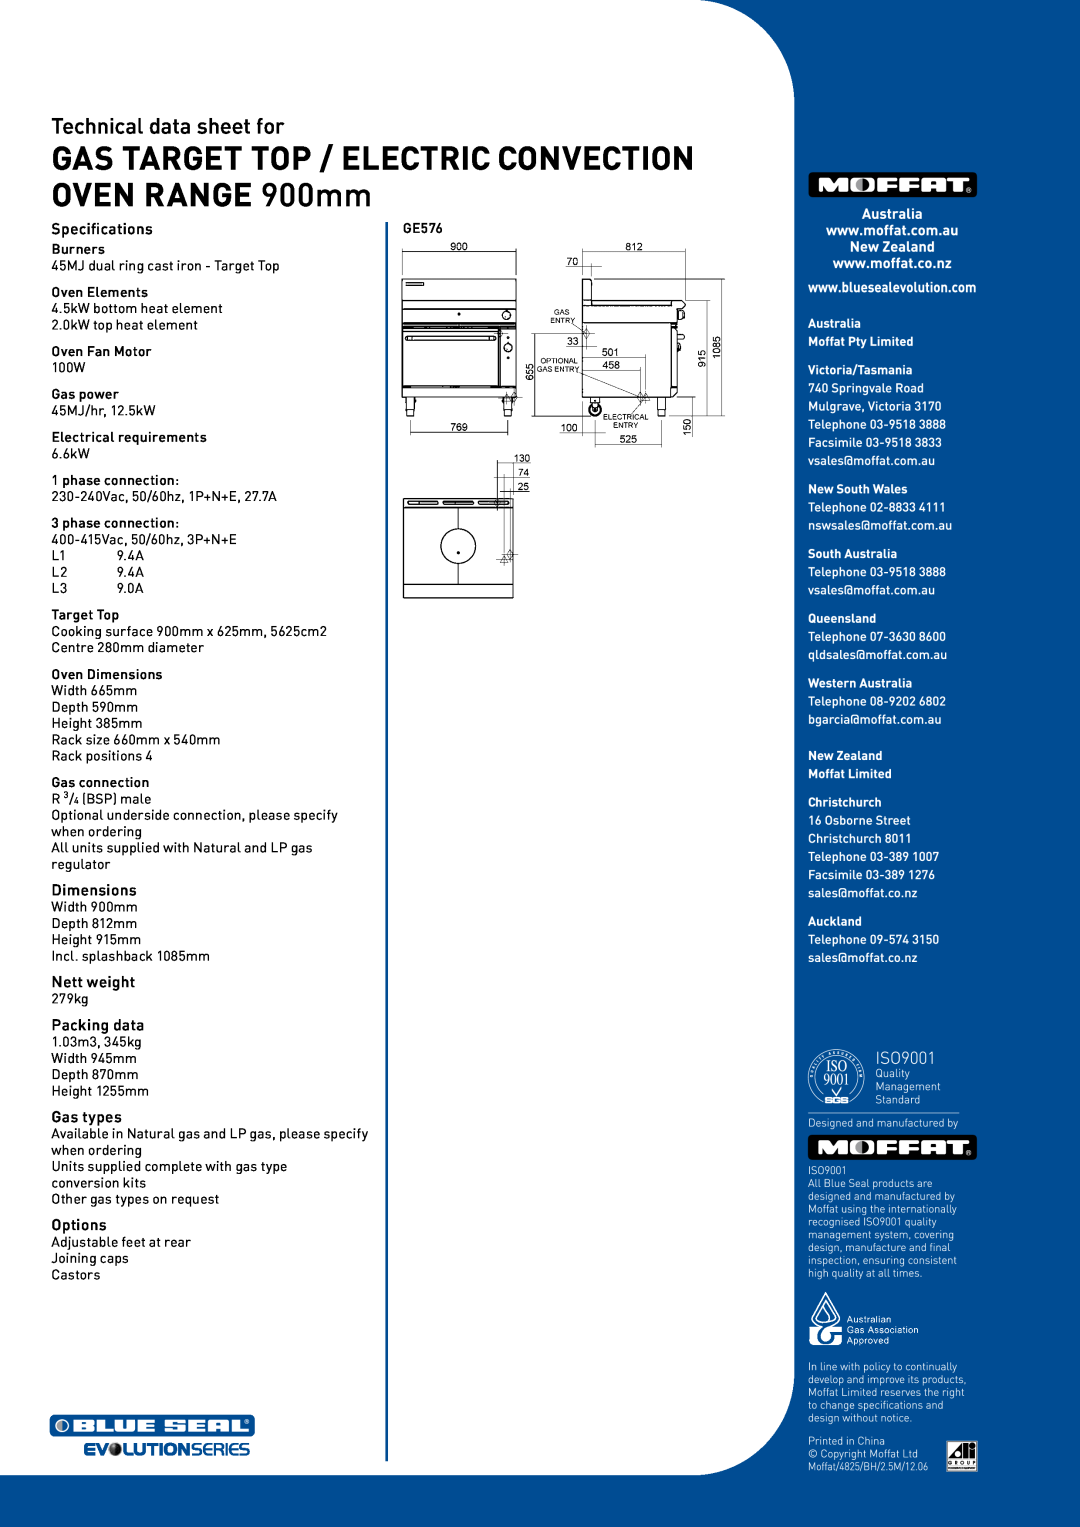 Moffat GE576 manual Specifications, Dimensions, Nett weight, Packing data, Gas types, Options, Technical data sheet for 